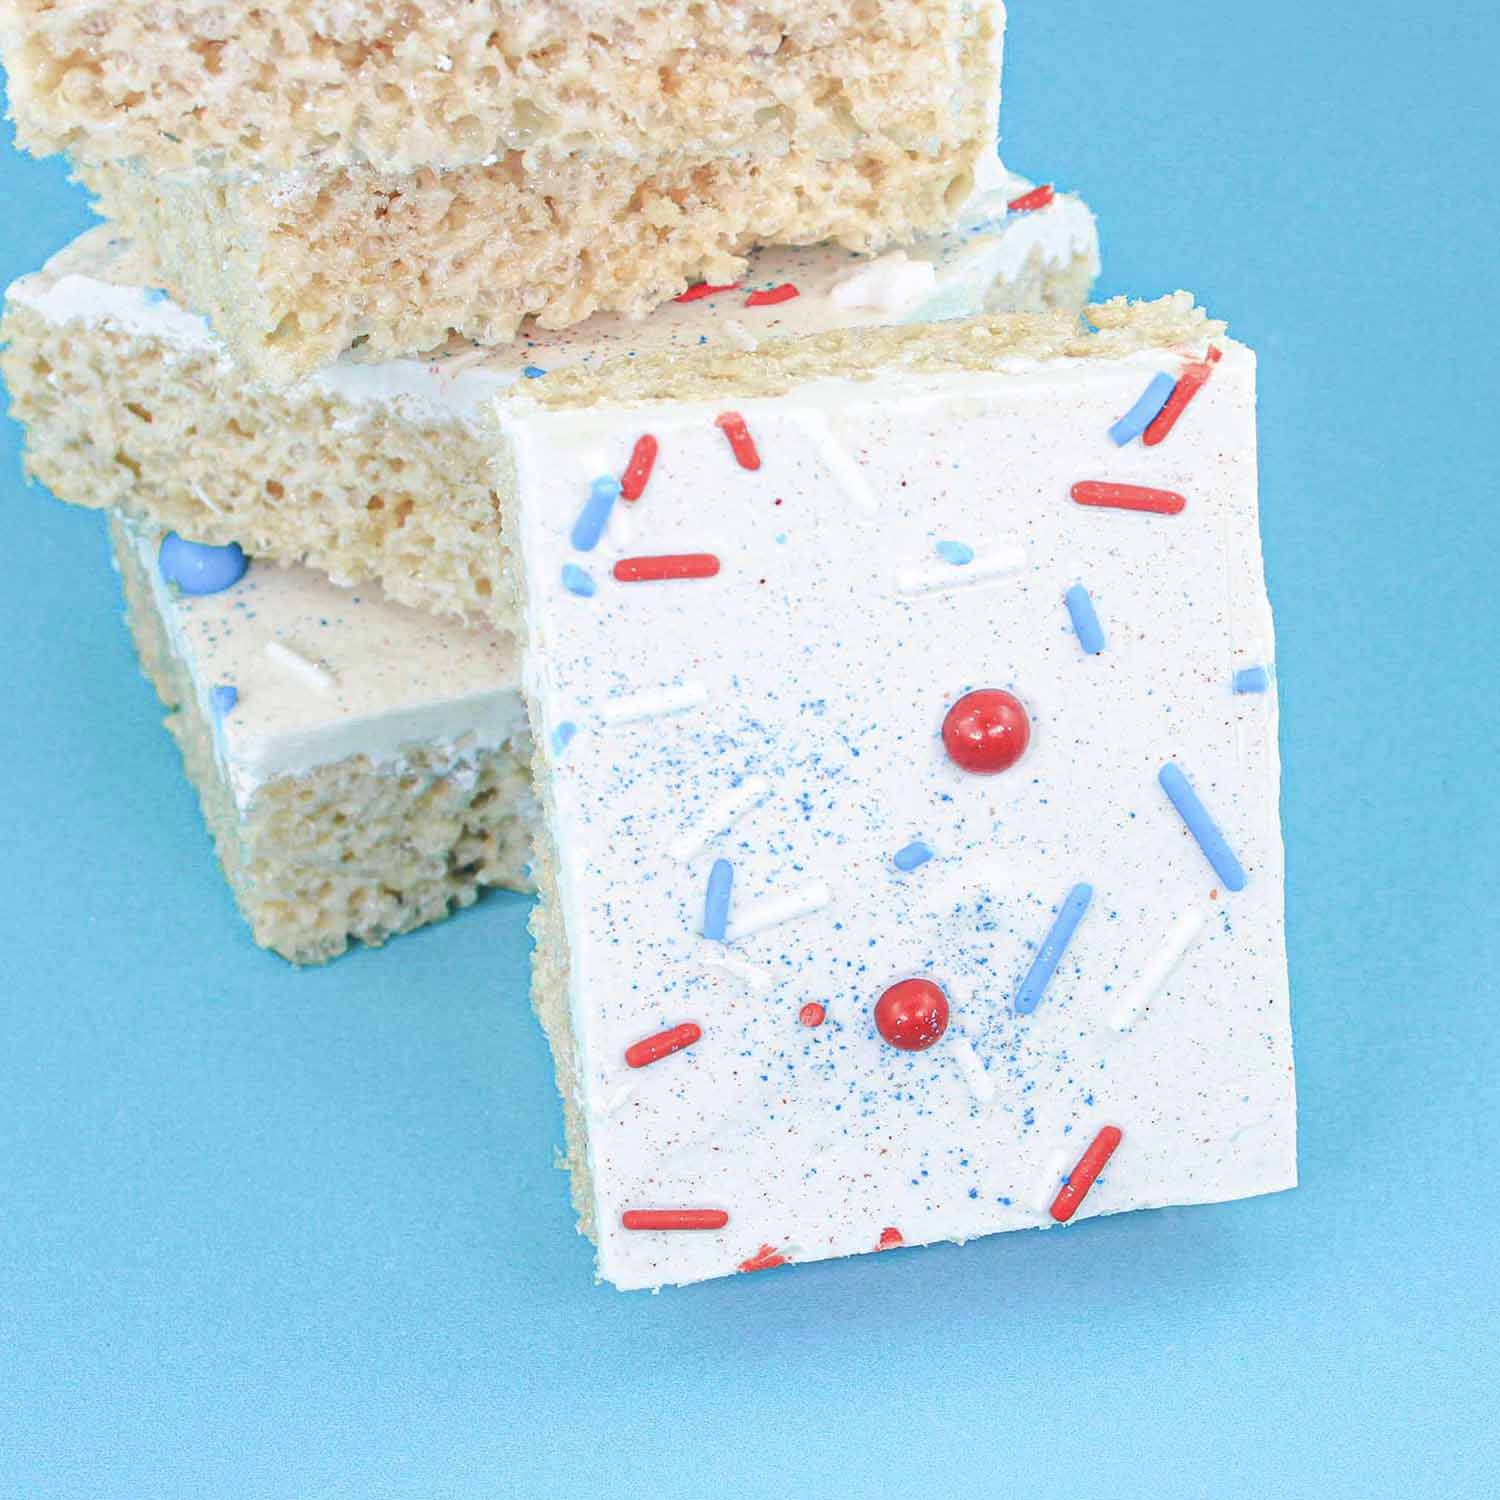 Rice krispie treat coated in white chocolate, patriotic sprinkles and sparkling dusts